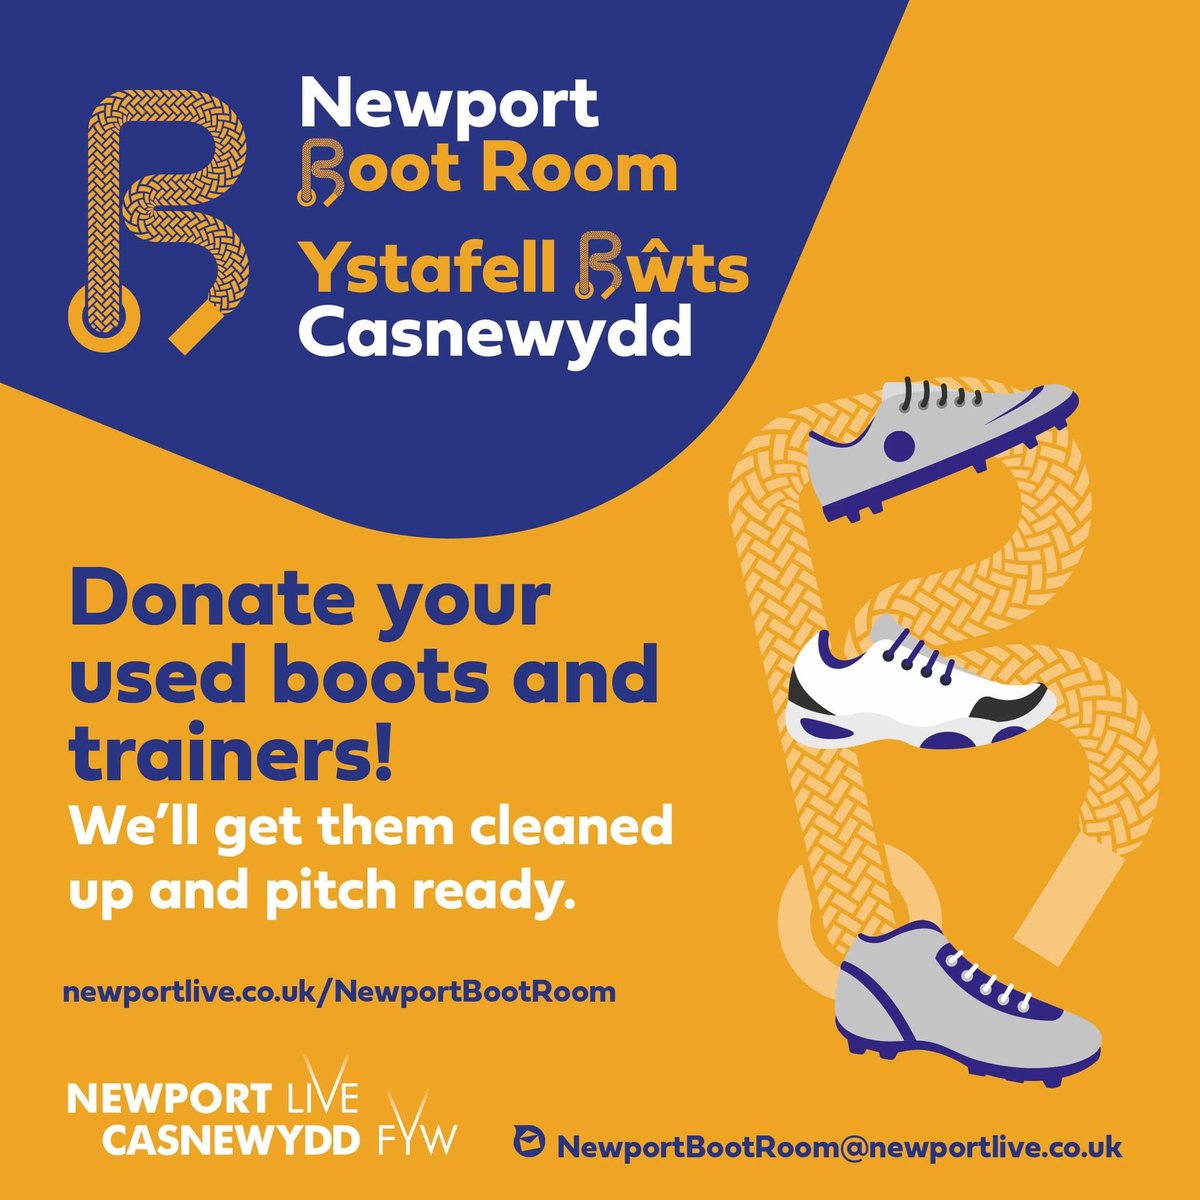 We’re launching a brand new initiative called the Newport Boot Room! @NewportLiveUK @nlsportsdev @PositiveFutures 
Donate footy/rugby boots/sports footwear-drop them in our Boot Room bins at all reception areas. We’ll clean them & resell for £5! Helping more comm sport projects!